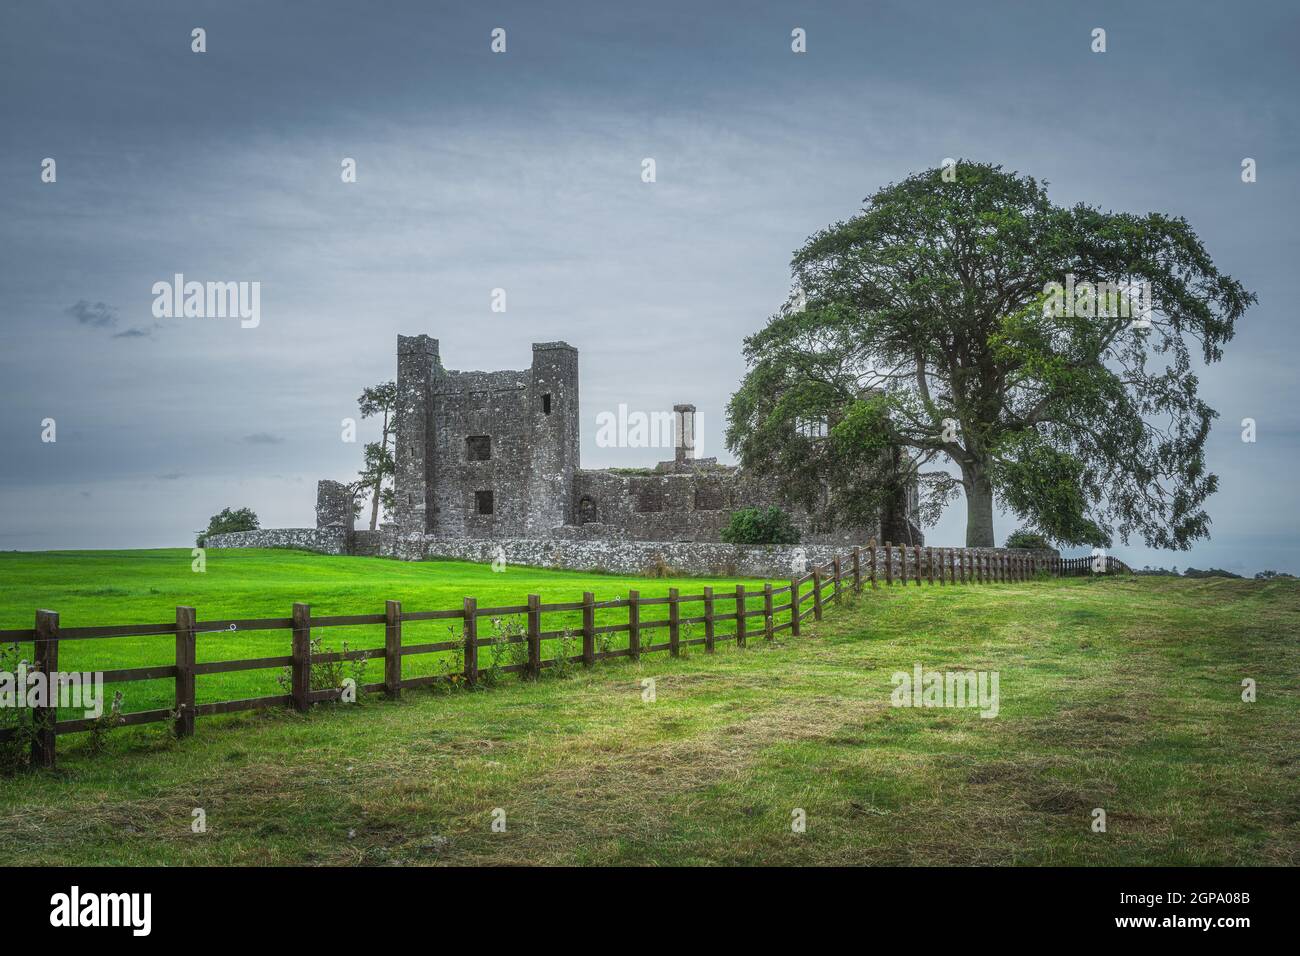 Pasture fence leading to old ruined Bective Abbey from 12th century with large green tree and field, dark sky in the background, County Meath, Ireland Stock Photo